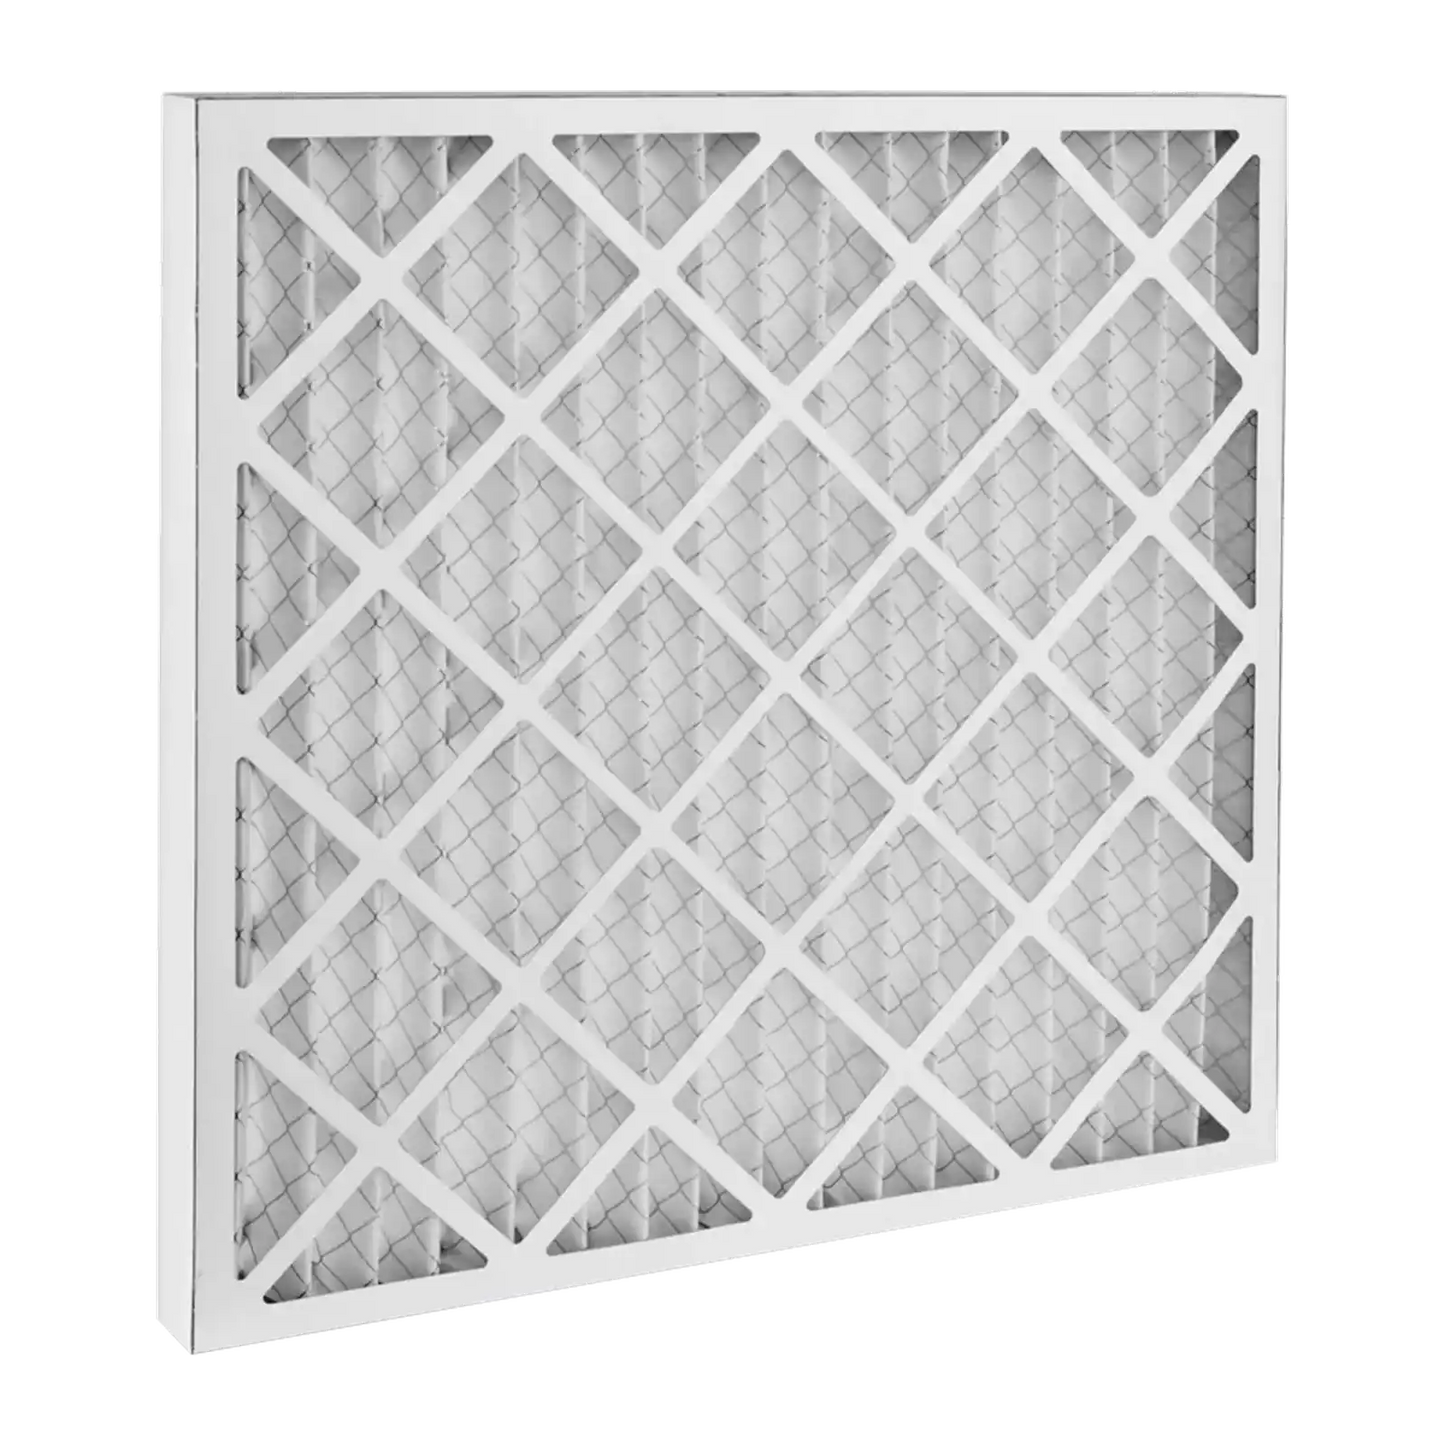 Dafco 16x20x1 Furnace AC Filter - Case of 12